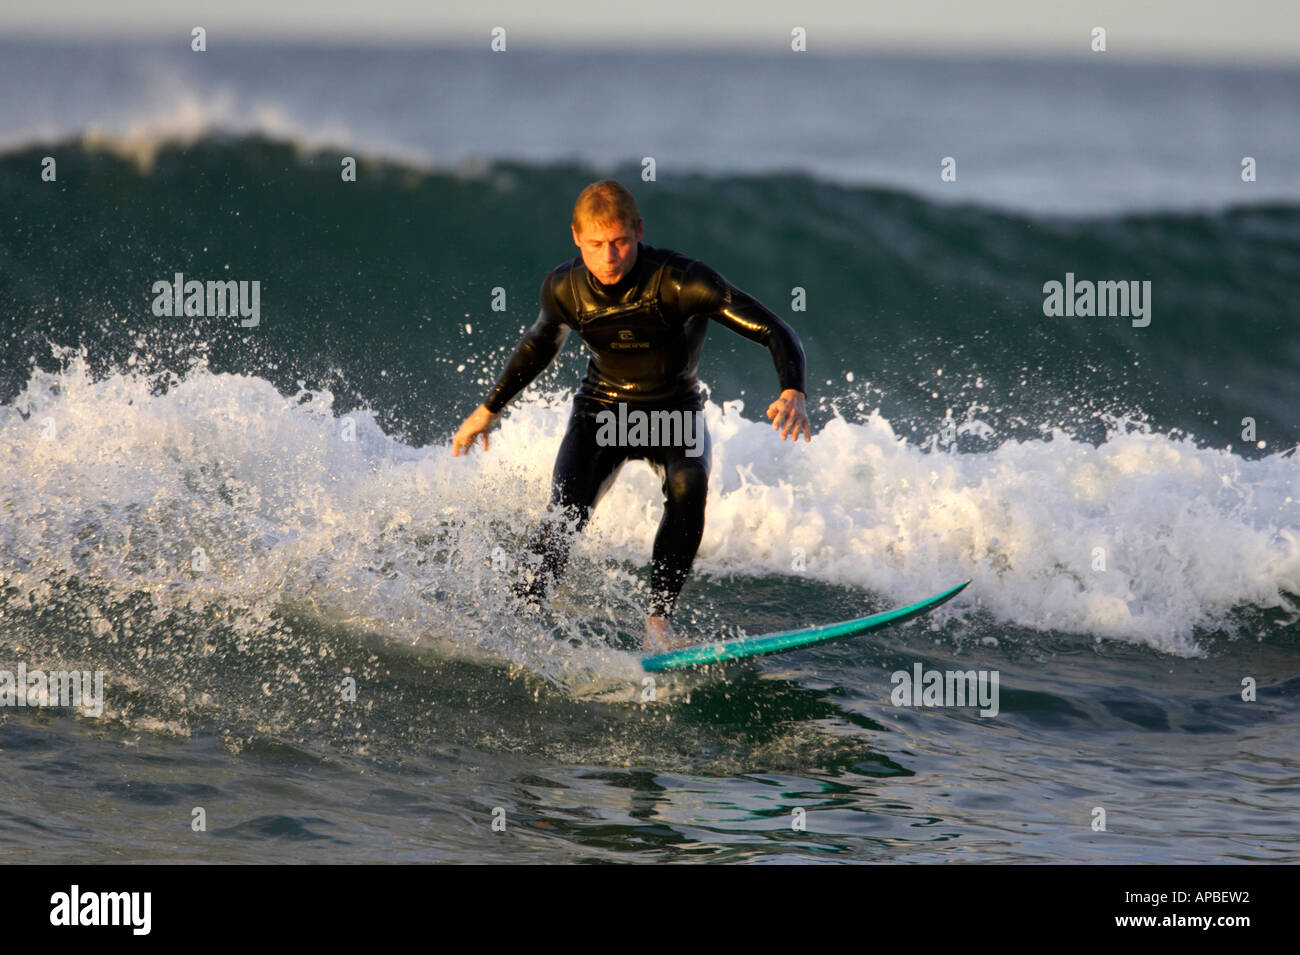 male surfer in wetsuit surfs on waves off white rocks beach portrush county antrim northern ireland Stock Photo